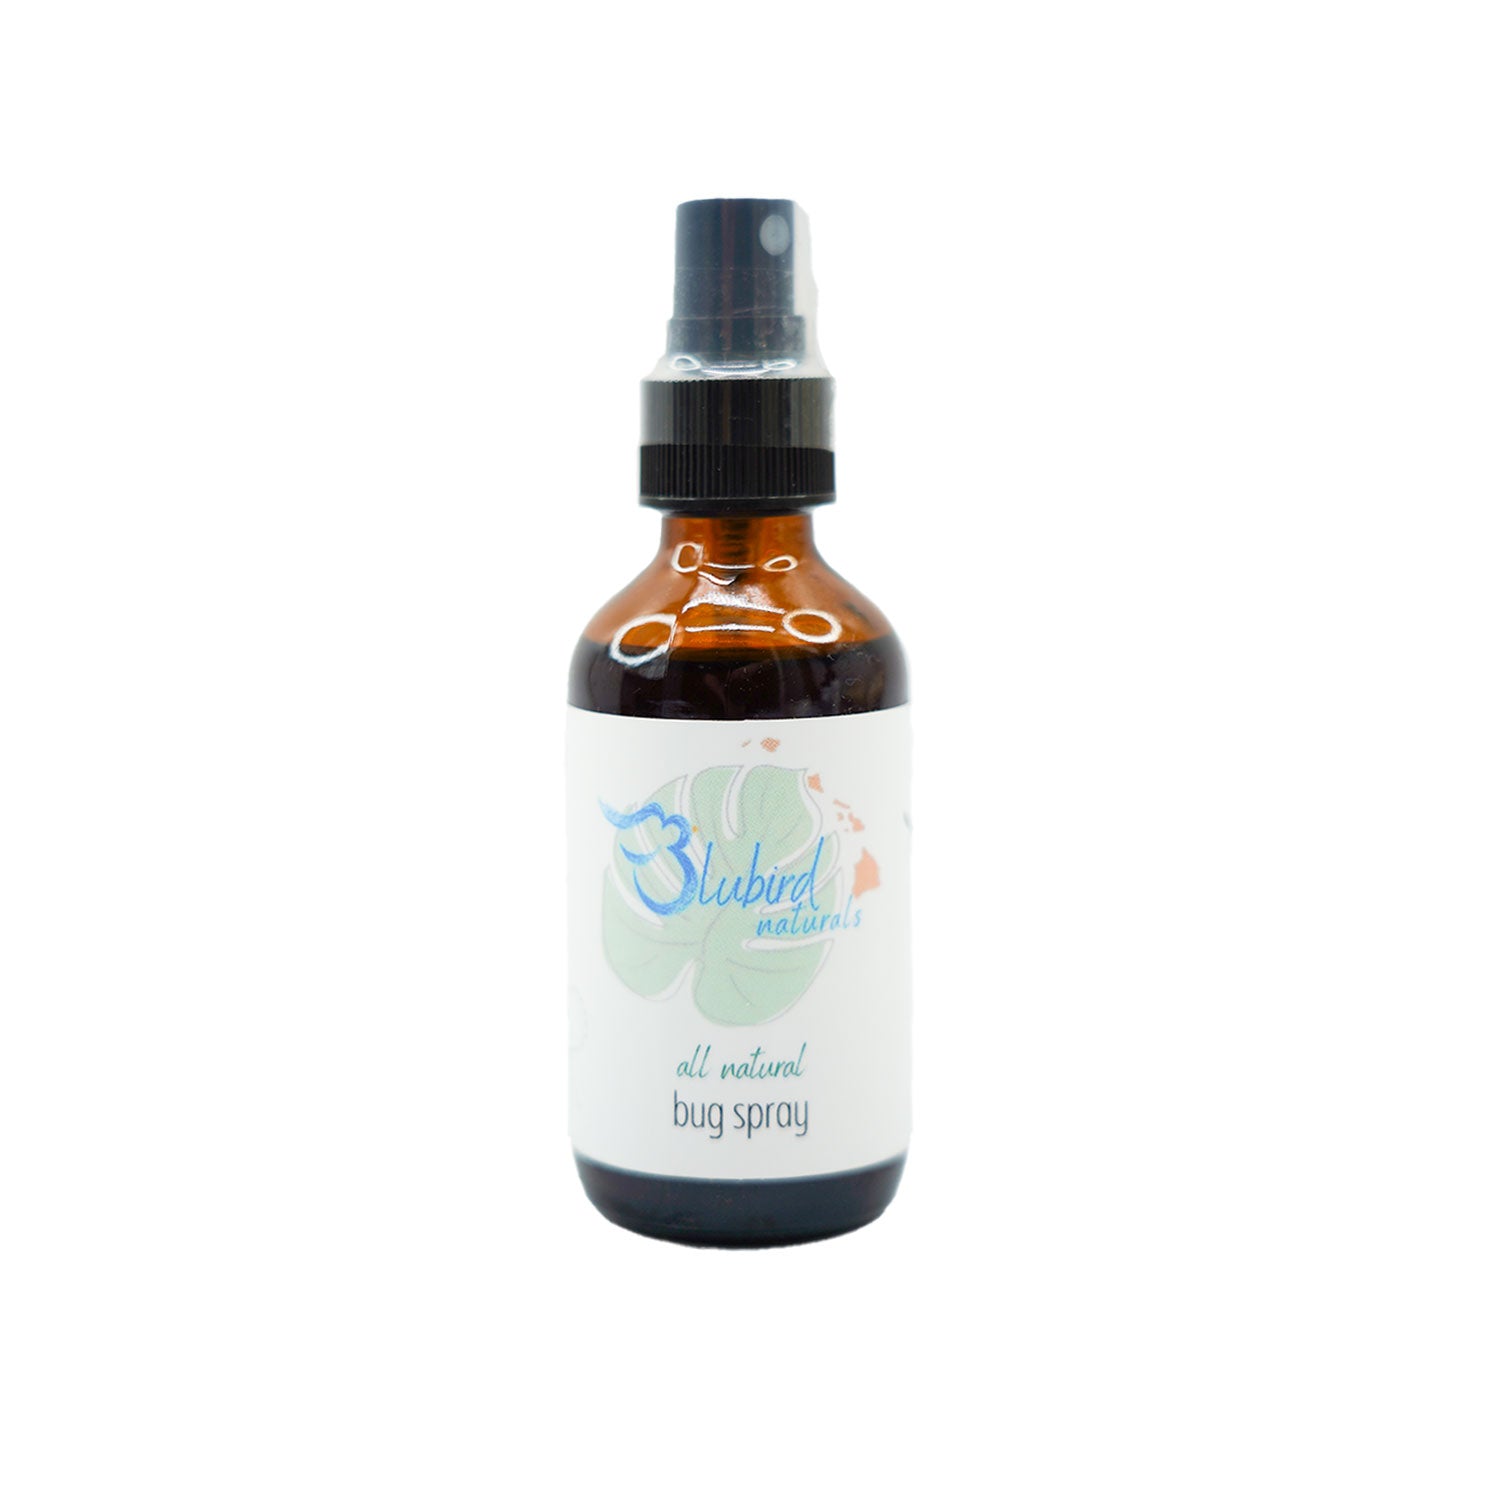 Say goodbye to bug bites and harsh chemicals with Blubird Naturals' All Natural Bug Spray. Handmade with simple, potent ingredients, this 2oz bottle is perfect for all your outdoor adventures.